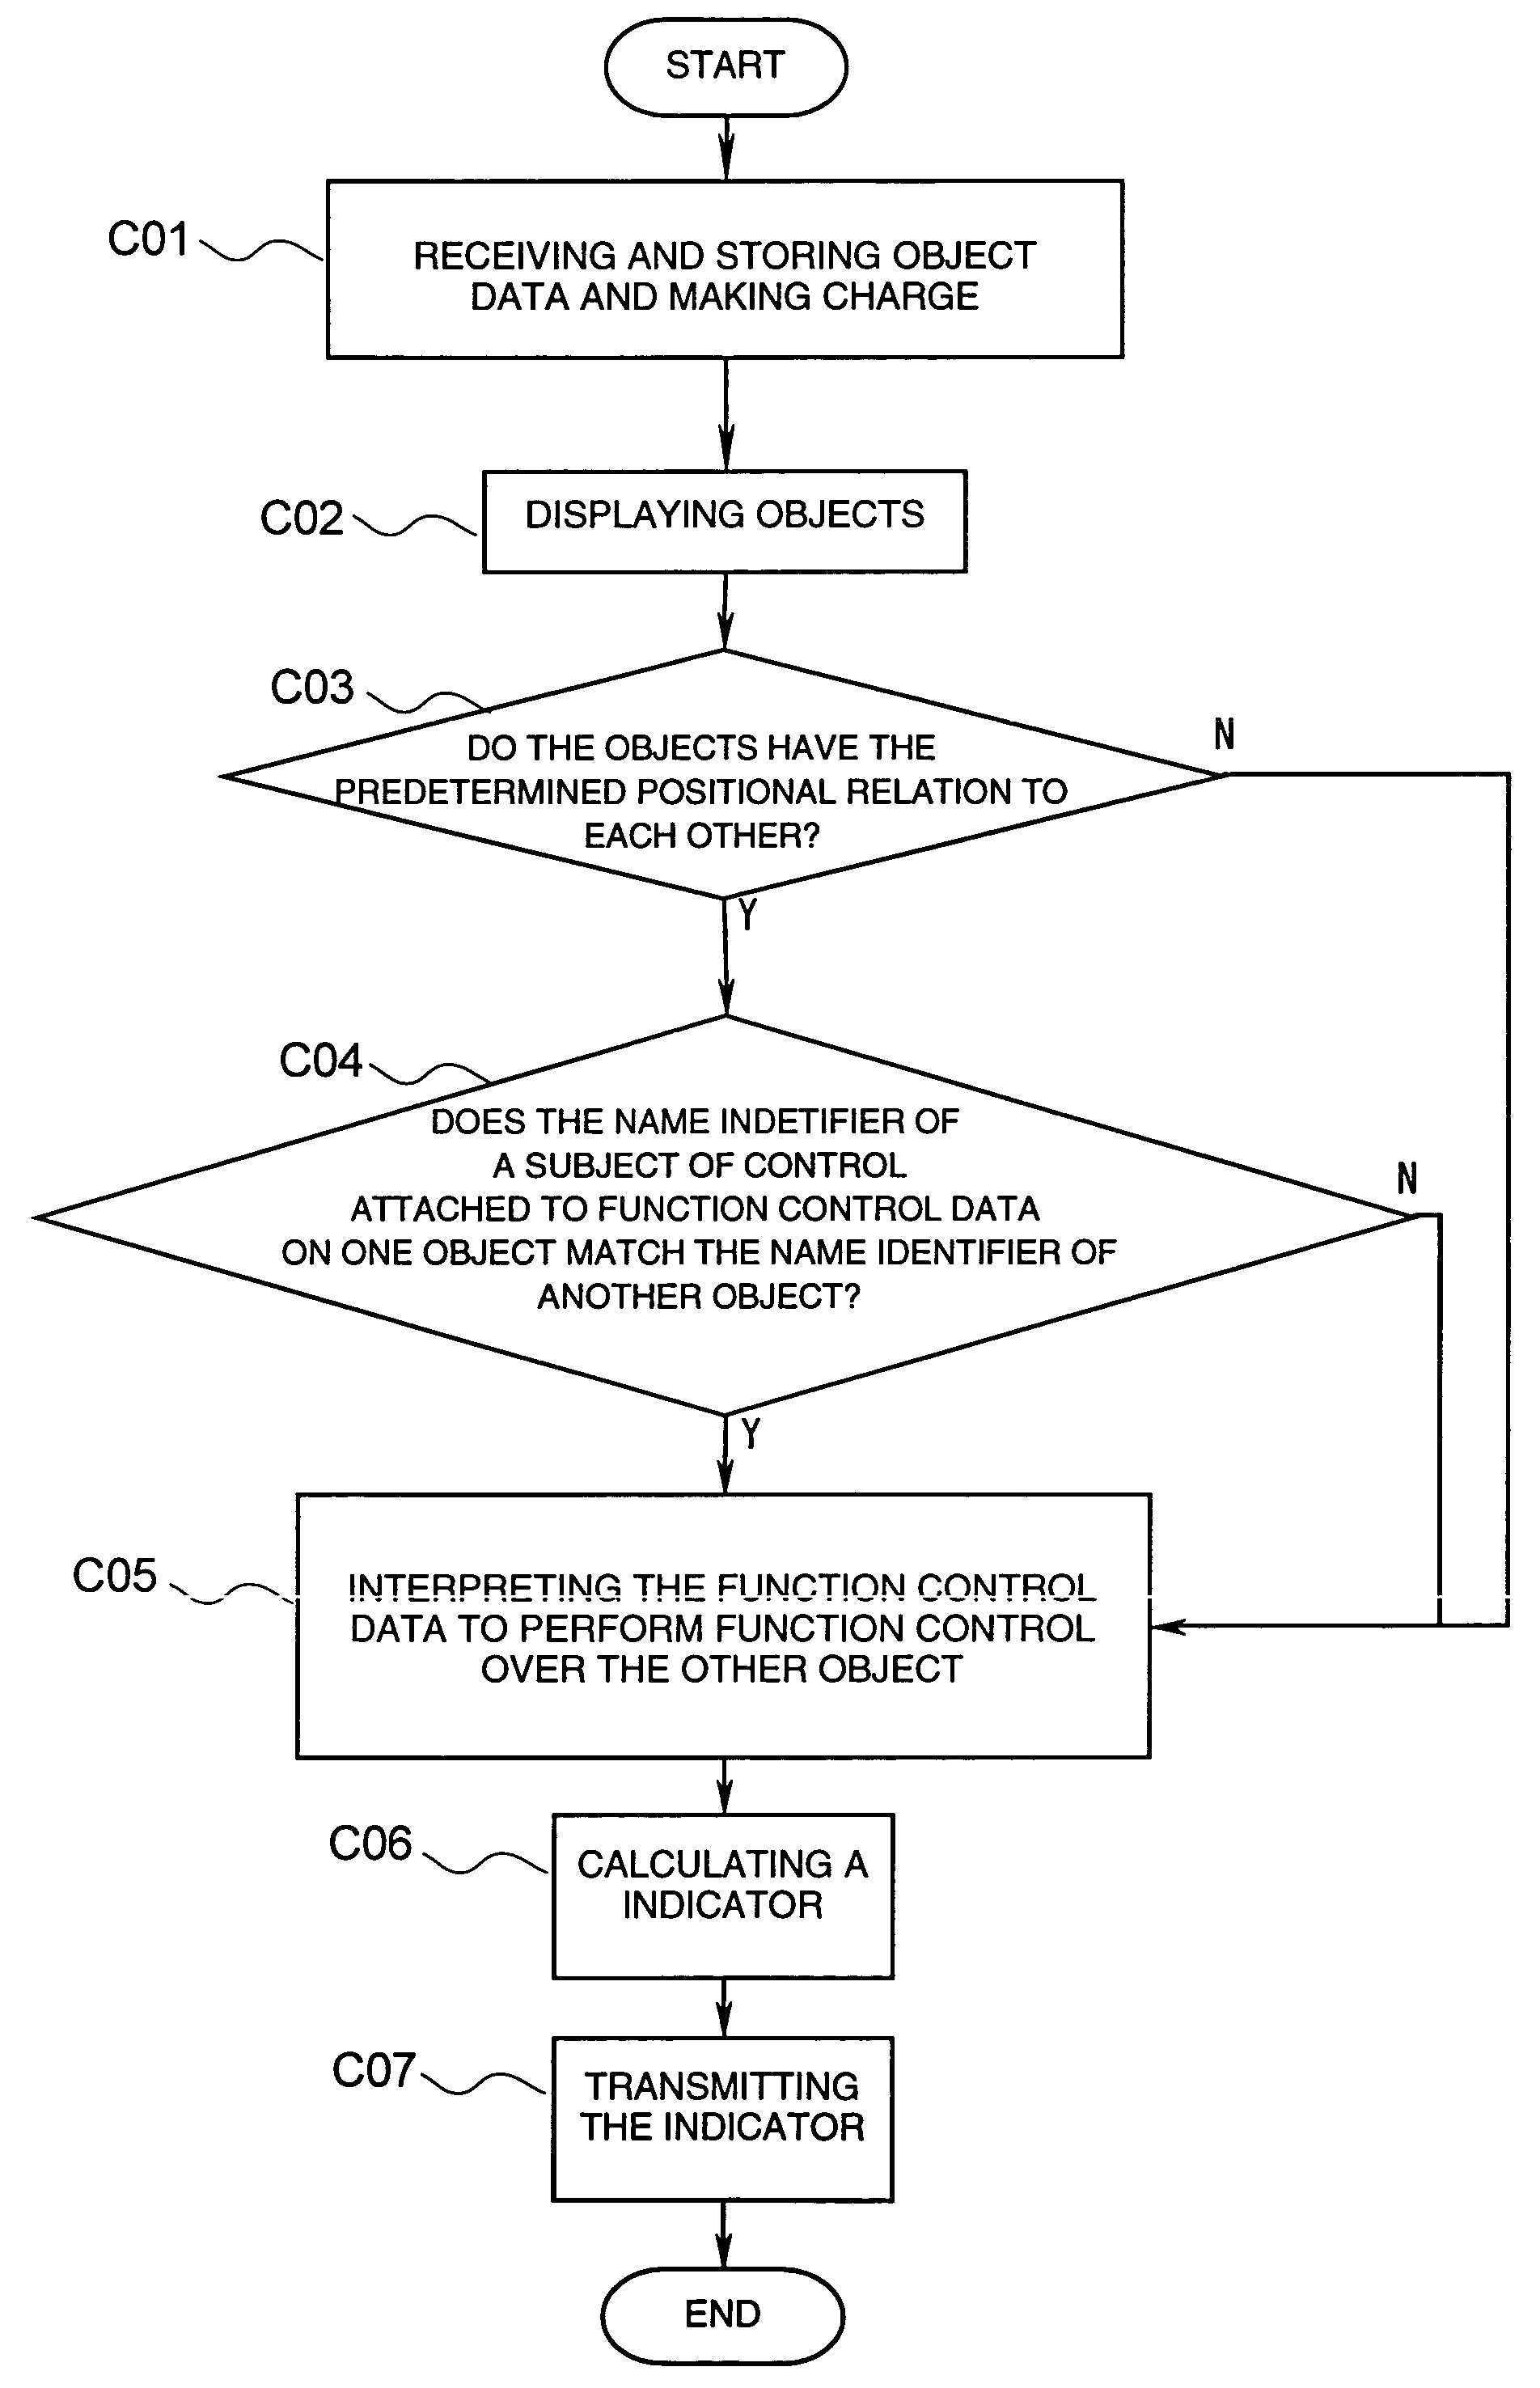 Functional object data, functional object imaging system, and object data transmitting unit, object data receiving unit and managing unit for use in the functional object imaging system